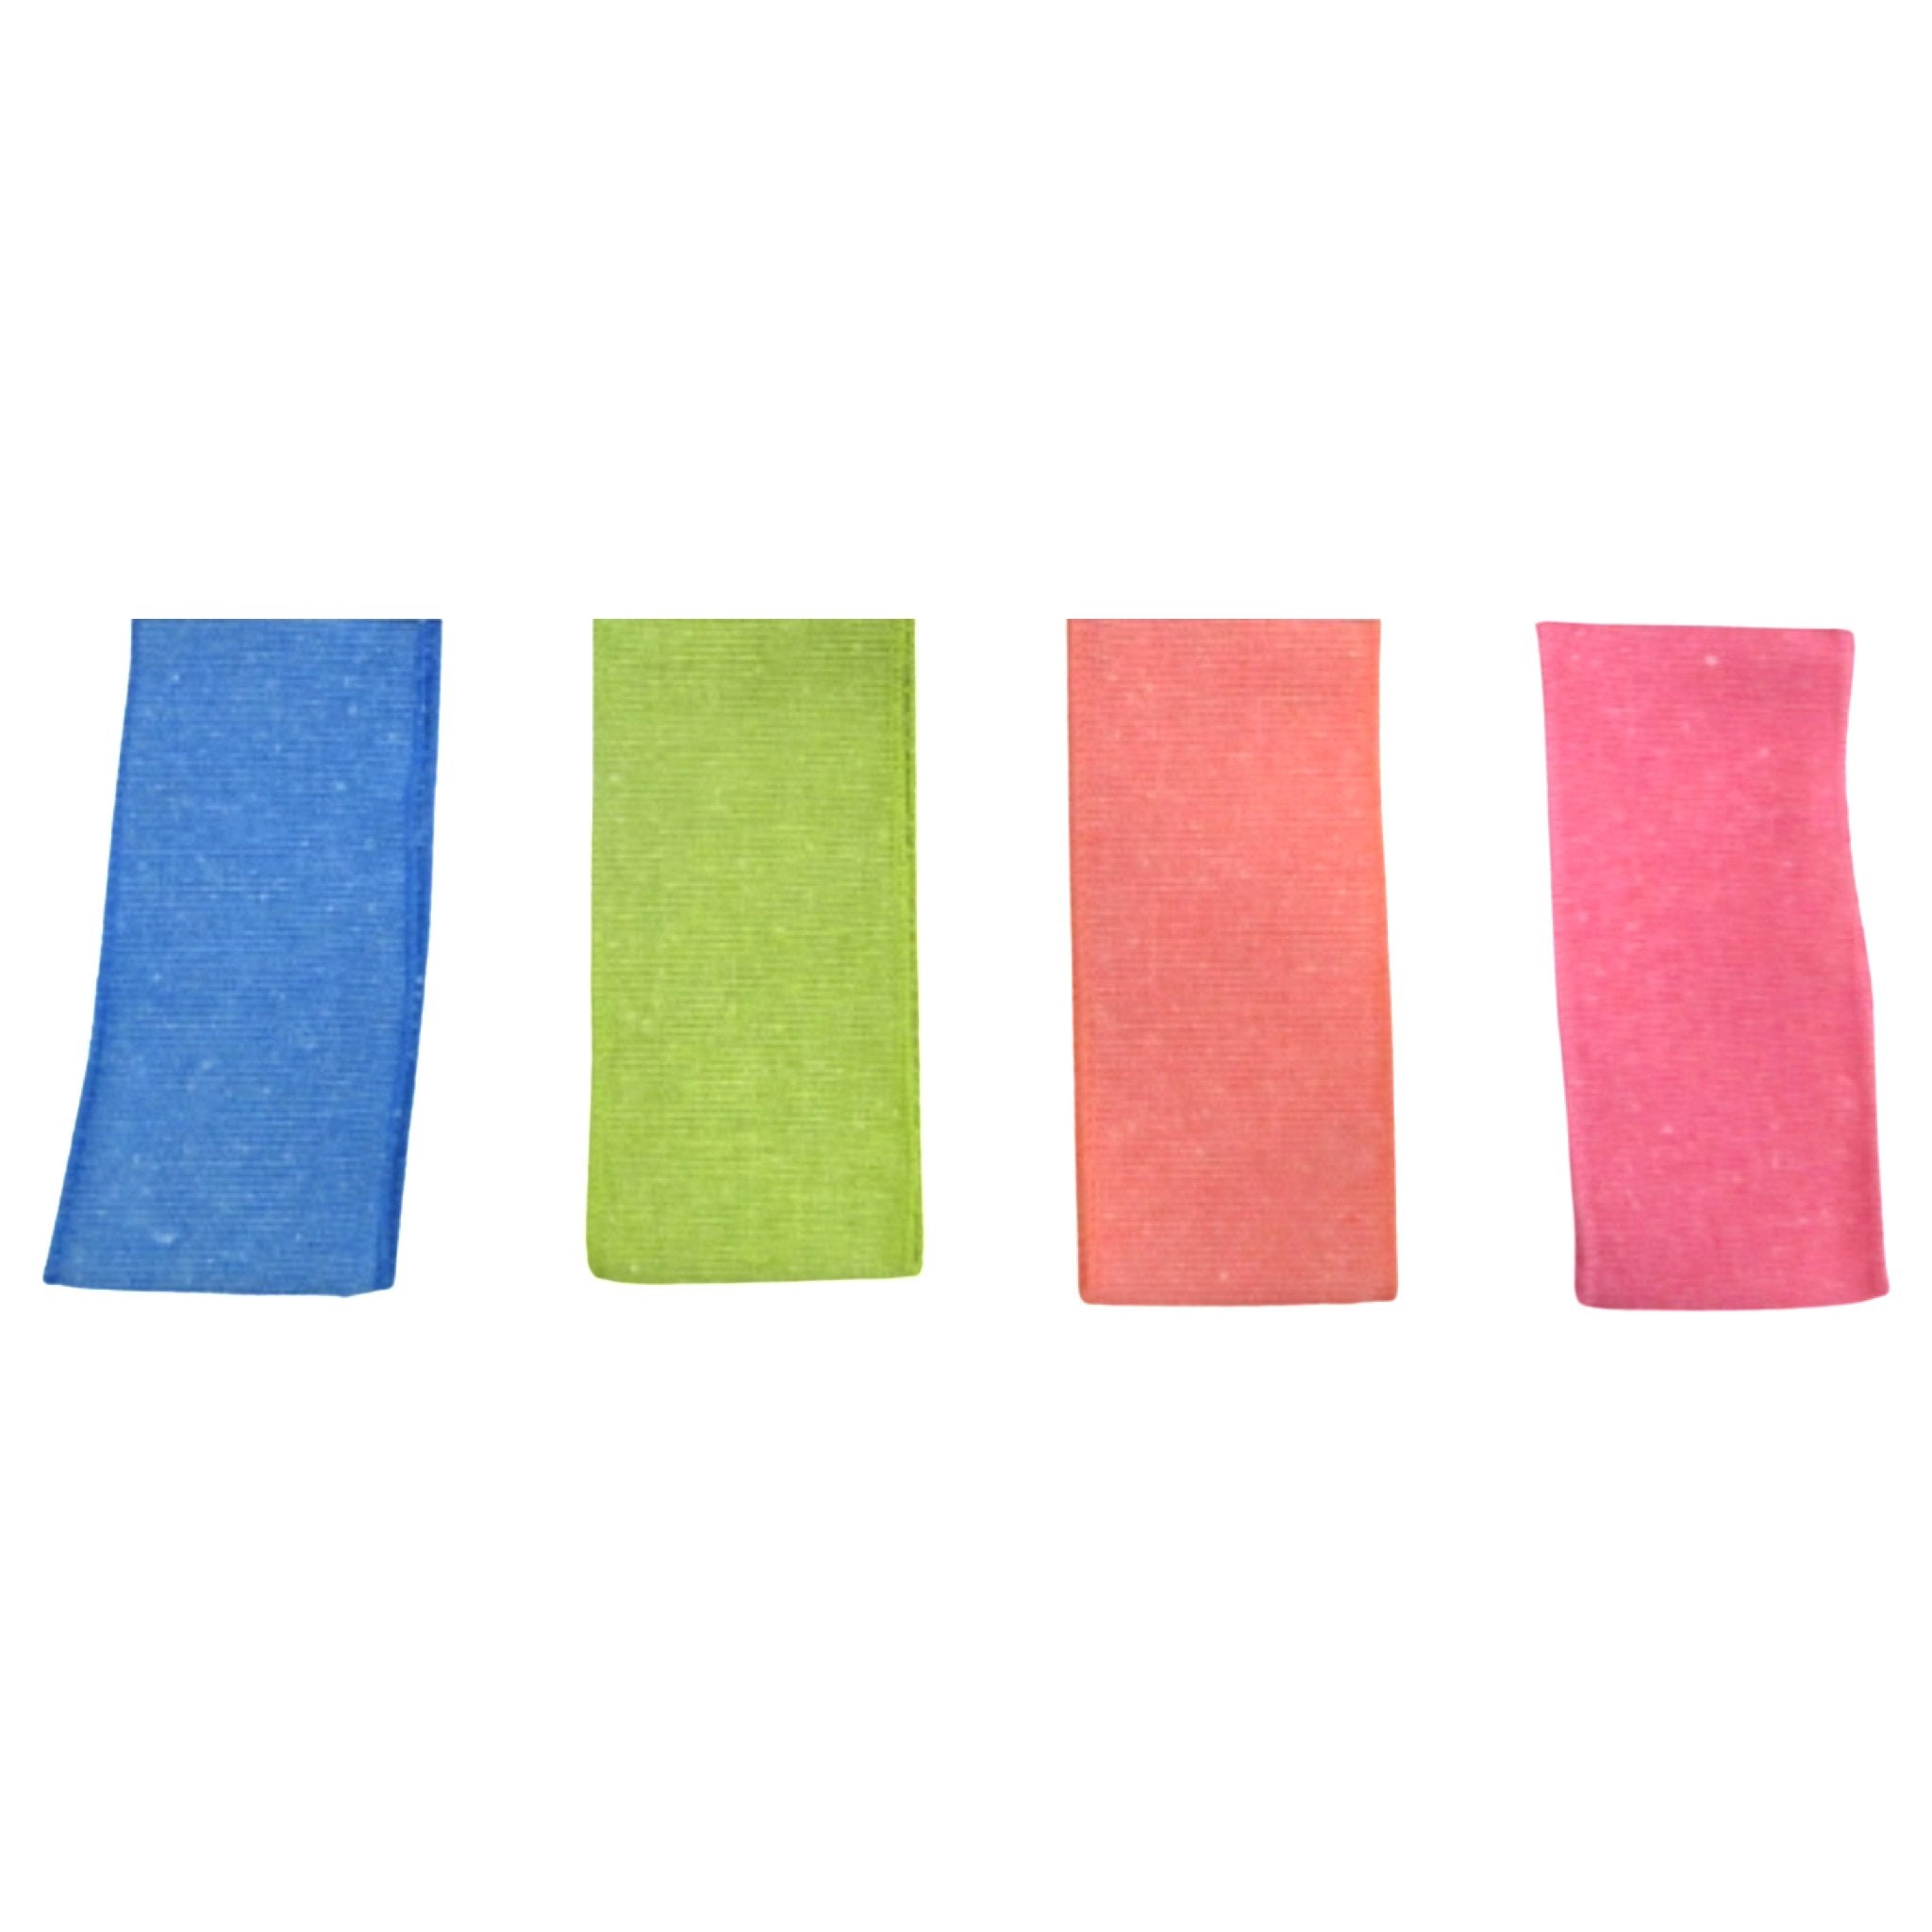 Canvas summer colored wired ribbon 2.5” choose color - Greenery MarketRibbons & Trim288704 pink